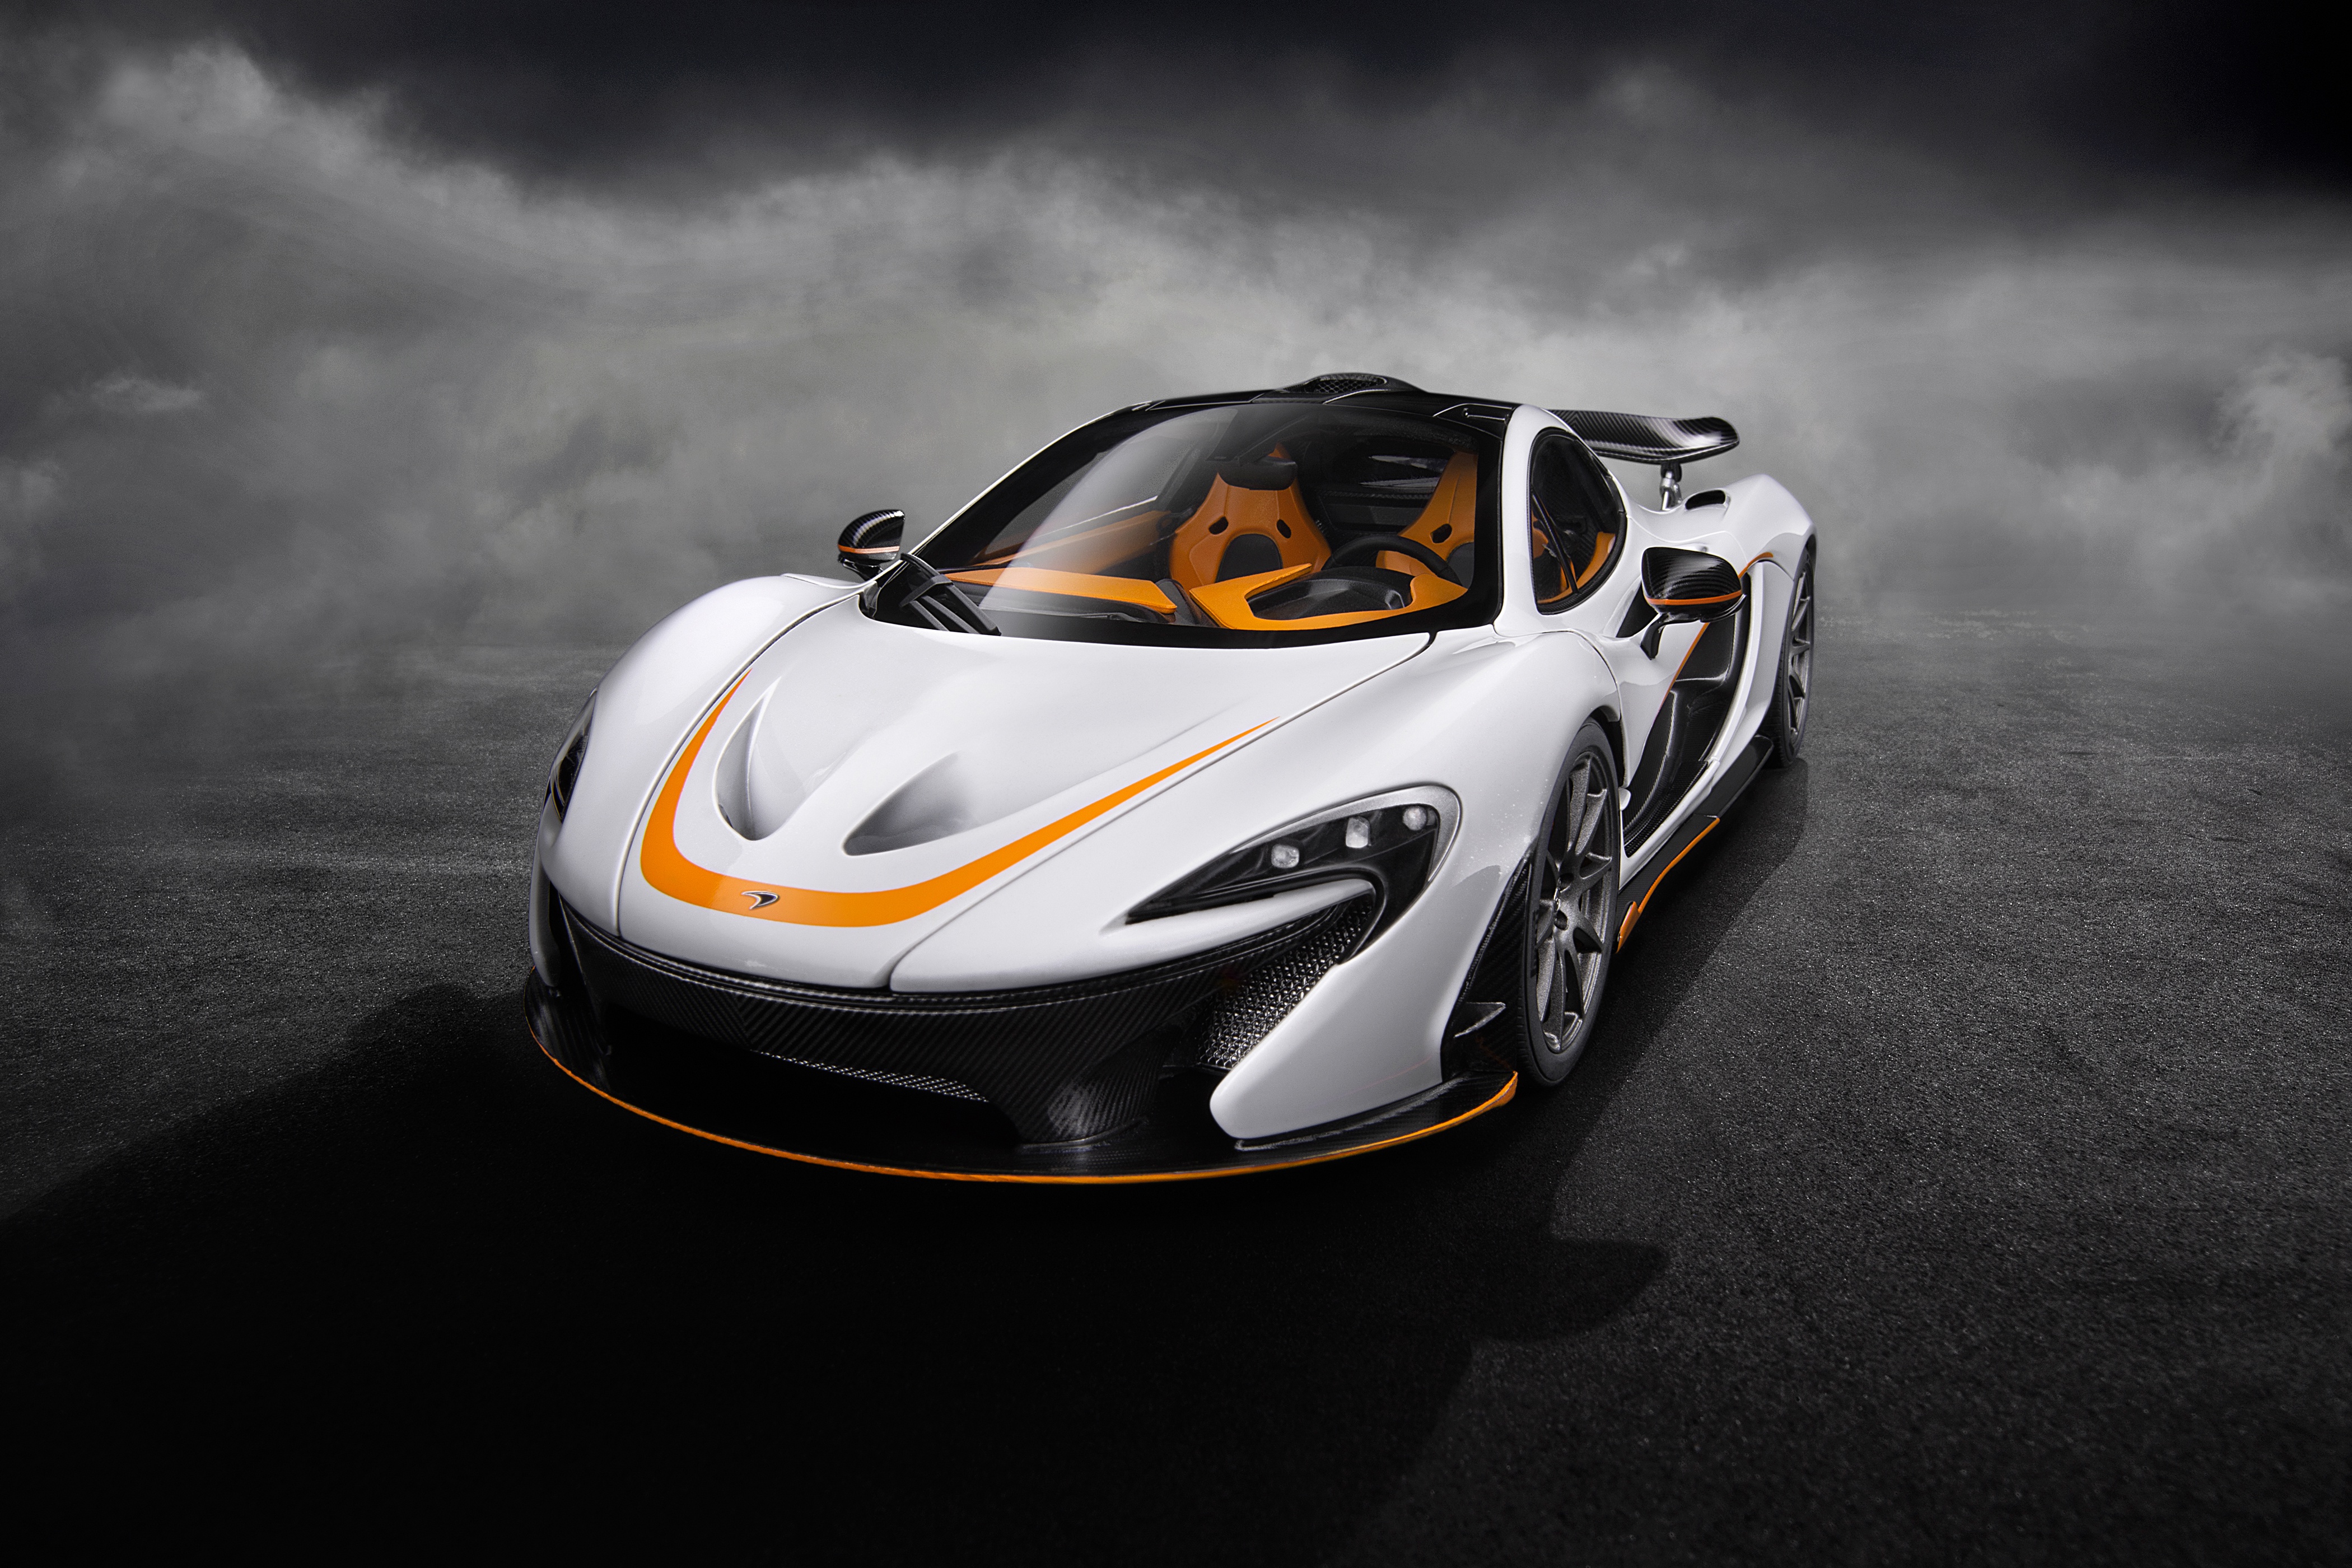 1440x2960 Mclaren P1 4k Samsung Galaxy Note 9 8 S9 S8 S8 Qhd Hd 4k Wallpapers Images Backgrounds Photos And Pictures